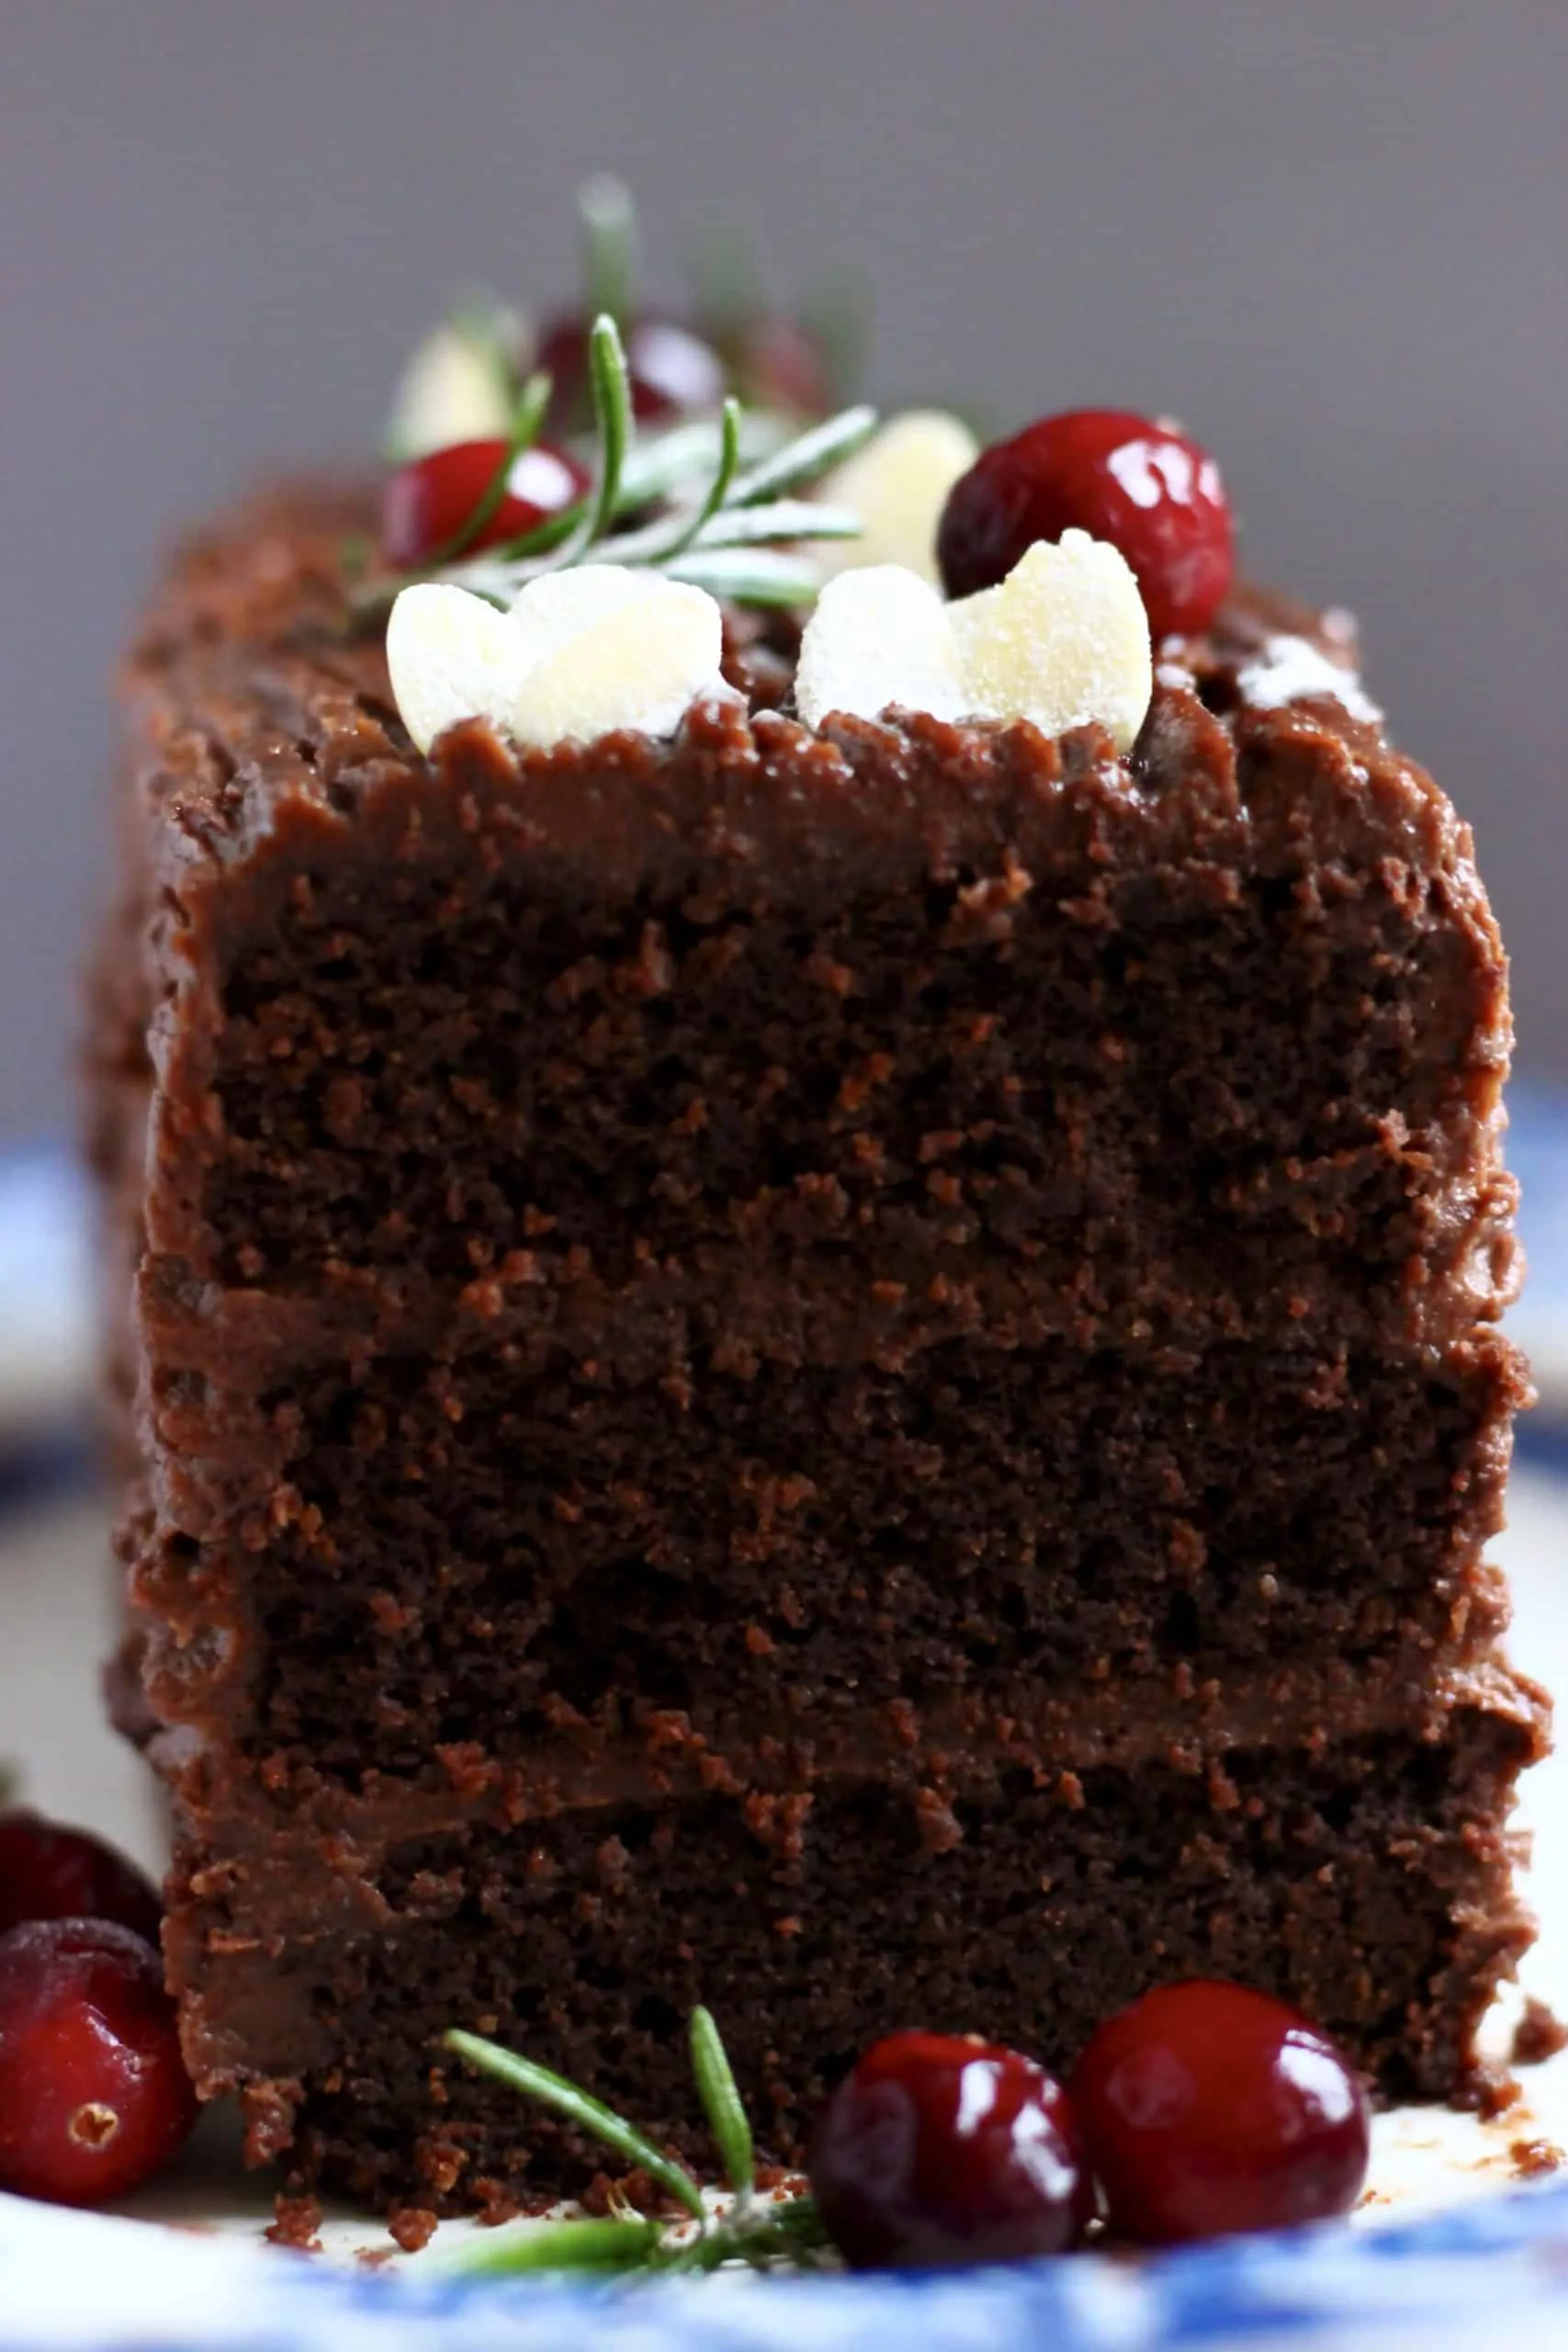 A sliced chocolate yule log with three layers topped with cranberries